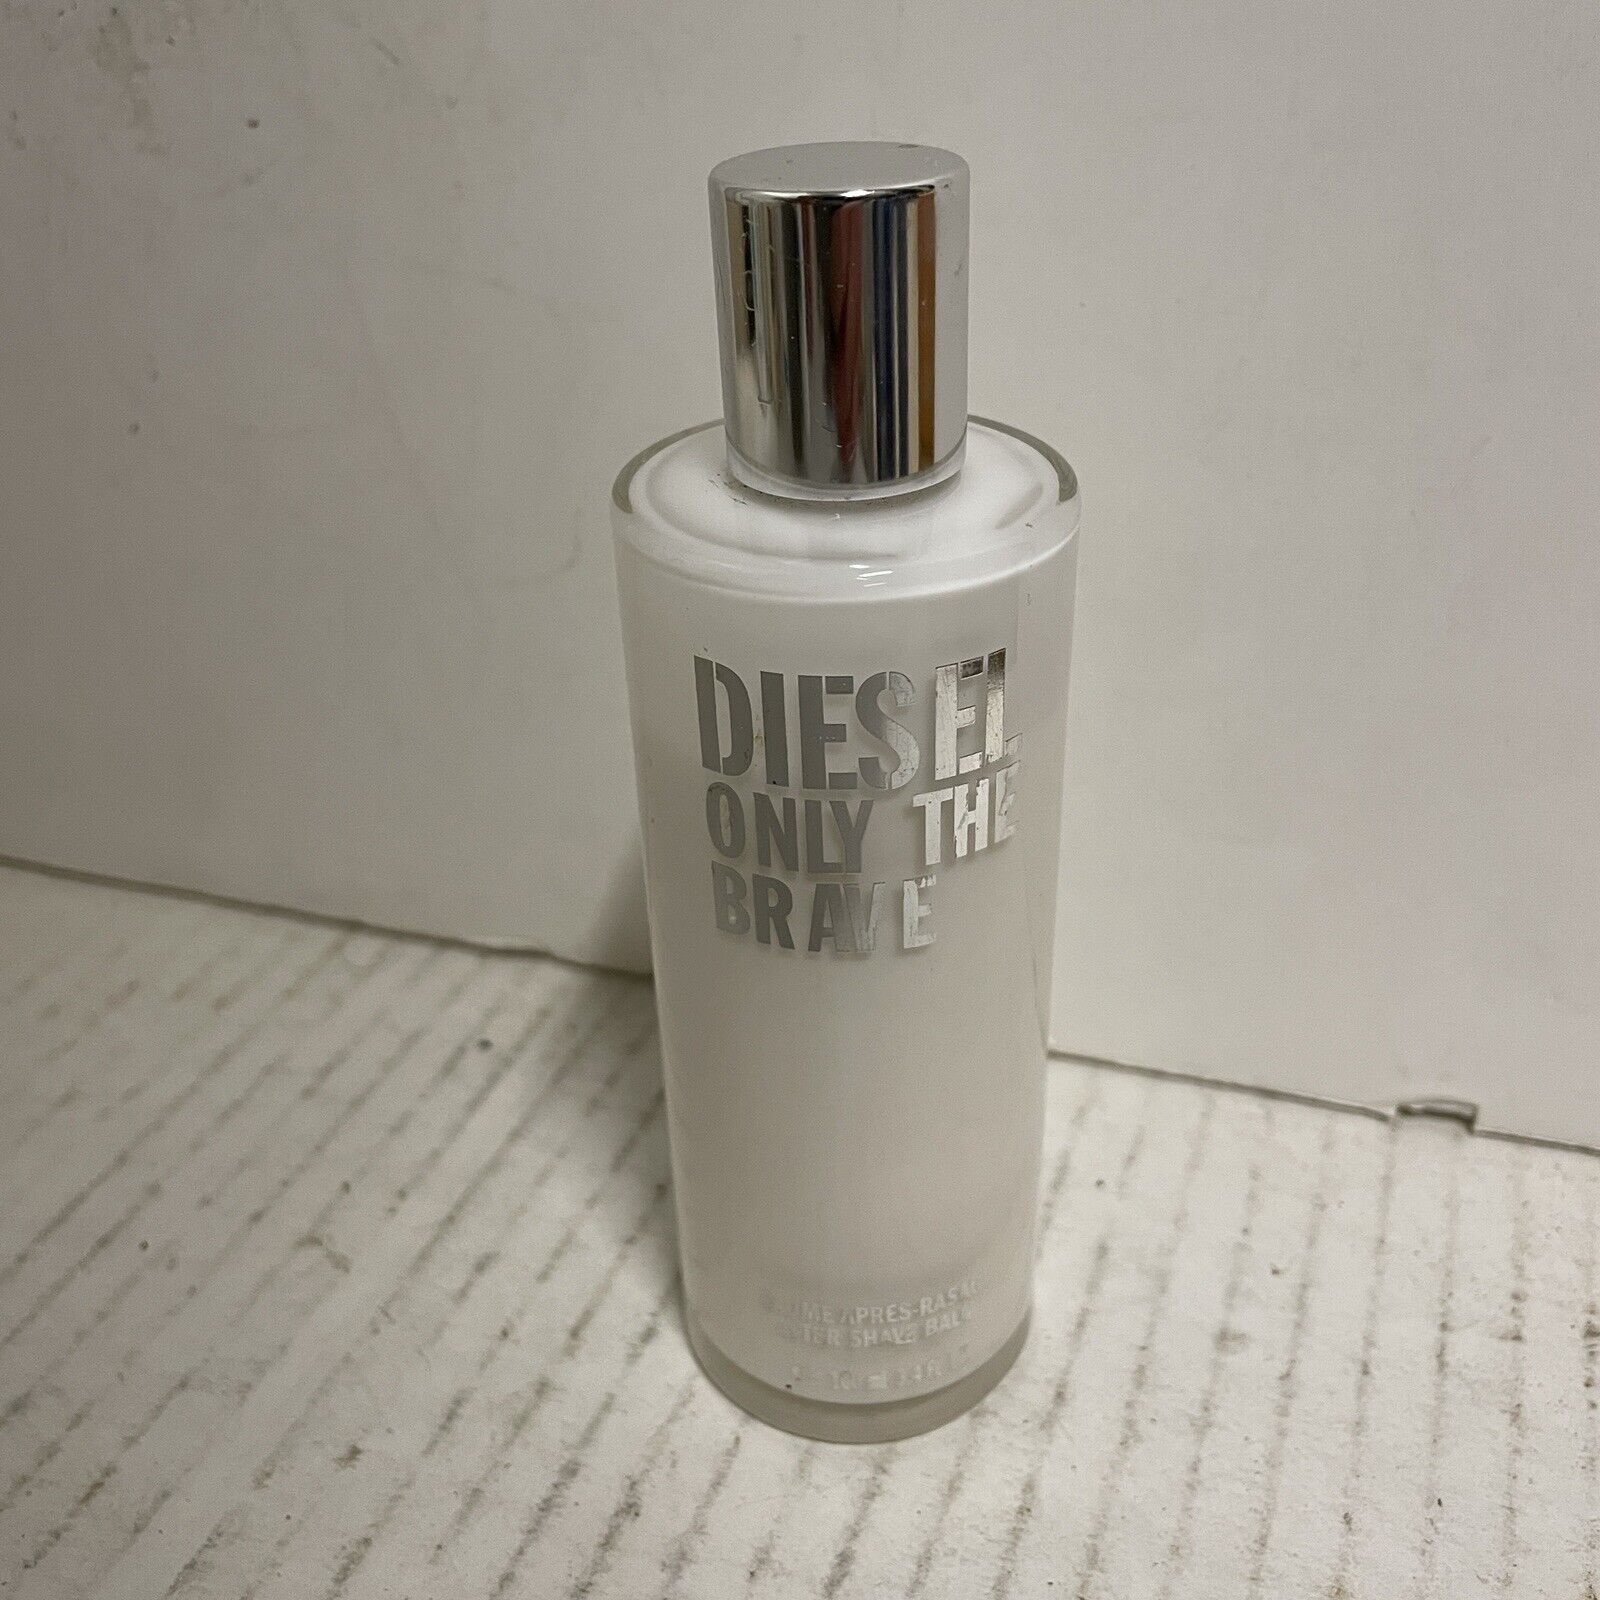 Diesel Only The Brave After Shave Balm HTF